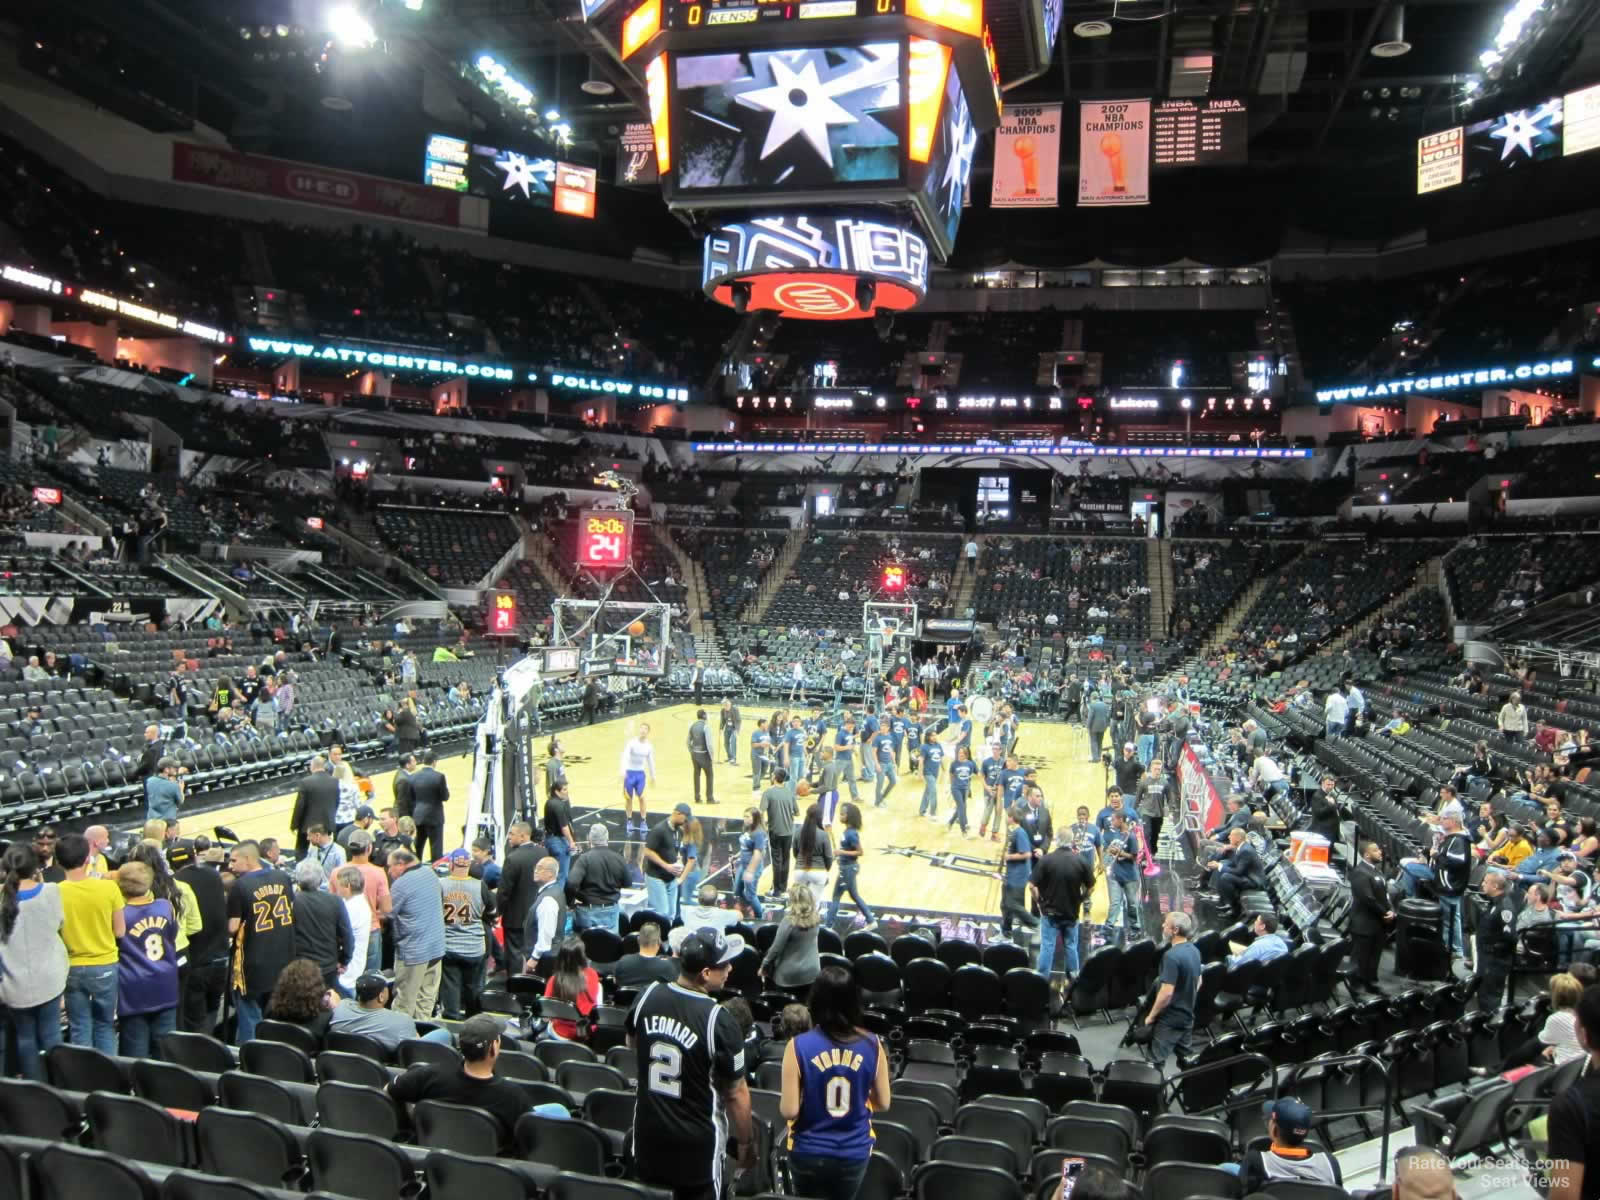 section 114, row 16 seat view  for basketball - at&t center